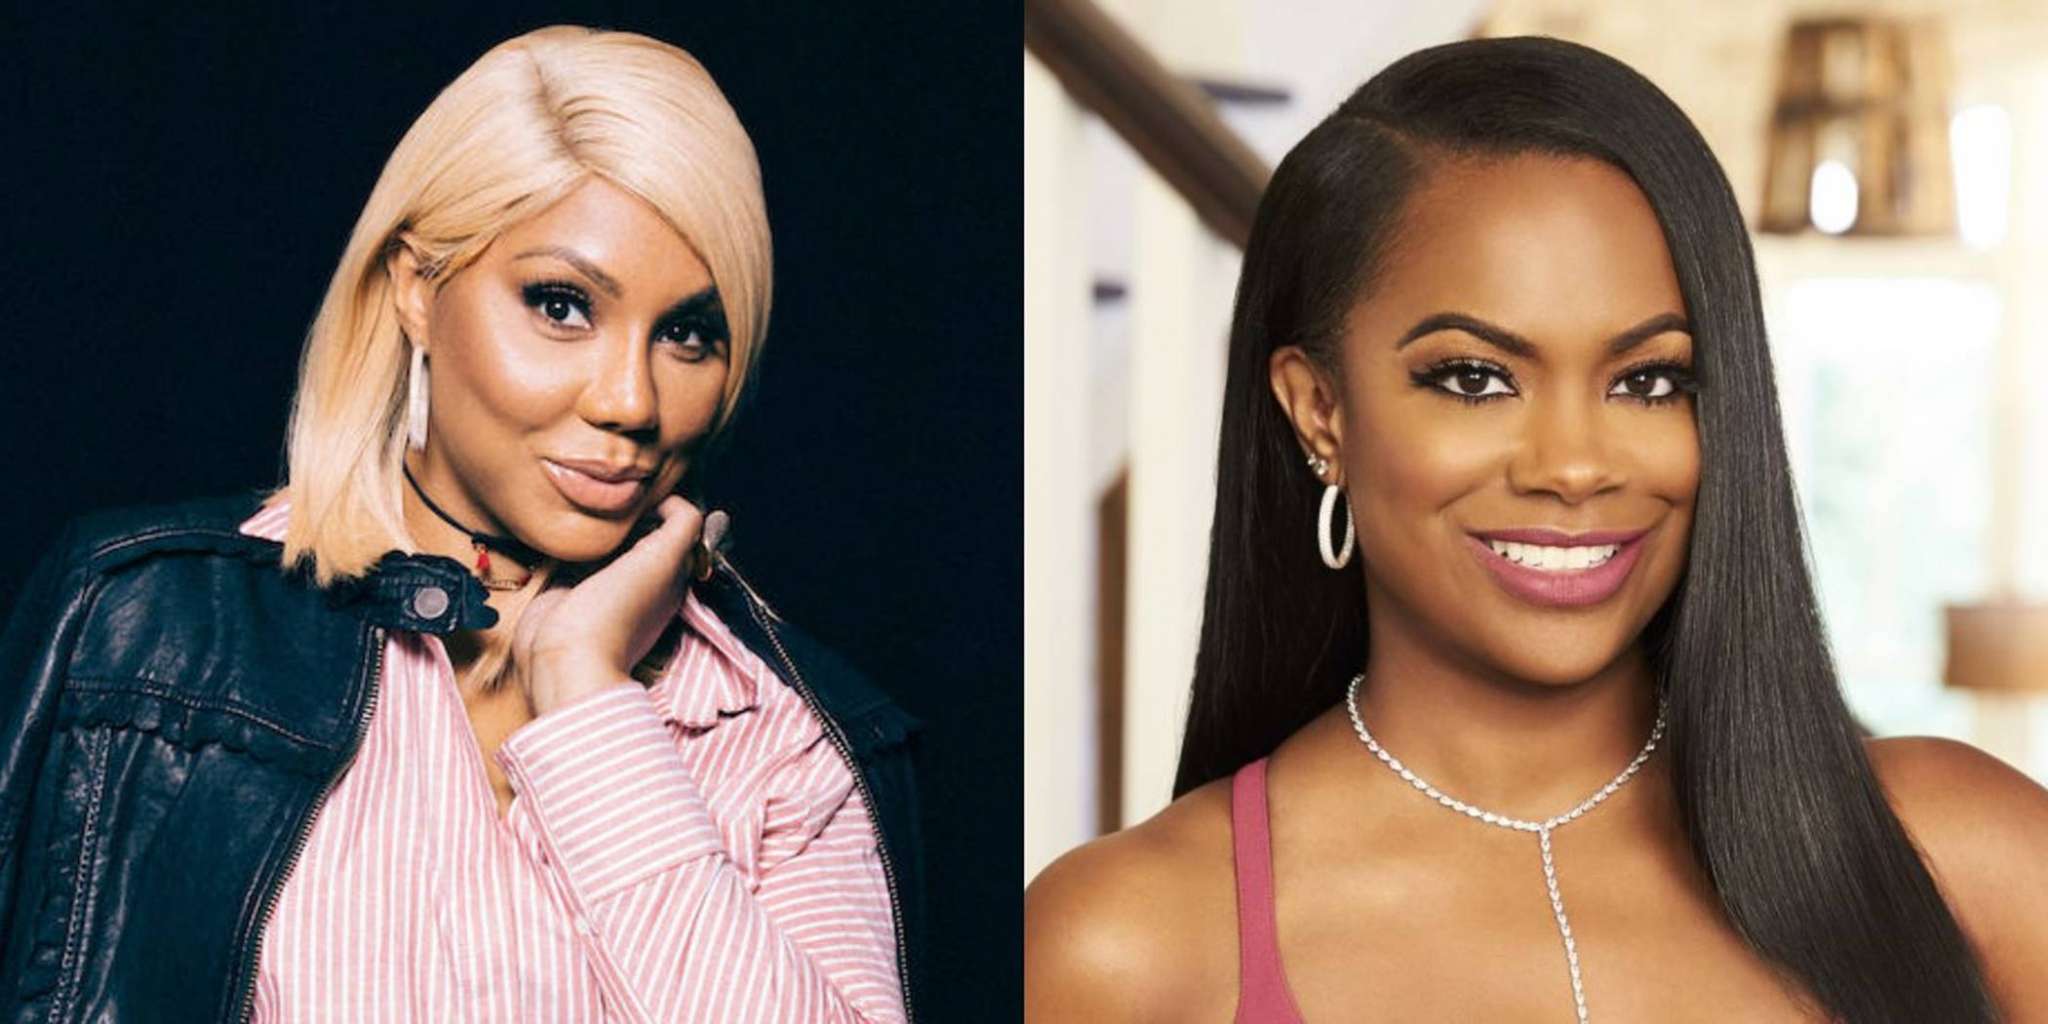 Some Of Kandi Burruss' Fans Hate That Tamar Braxton Is A Part Of 'Welcome To The Dungeon' Show - Find Out Their Arguments